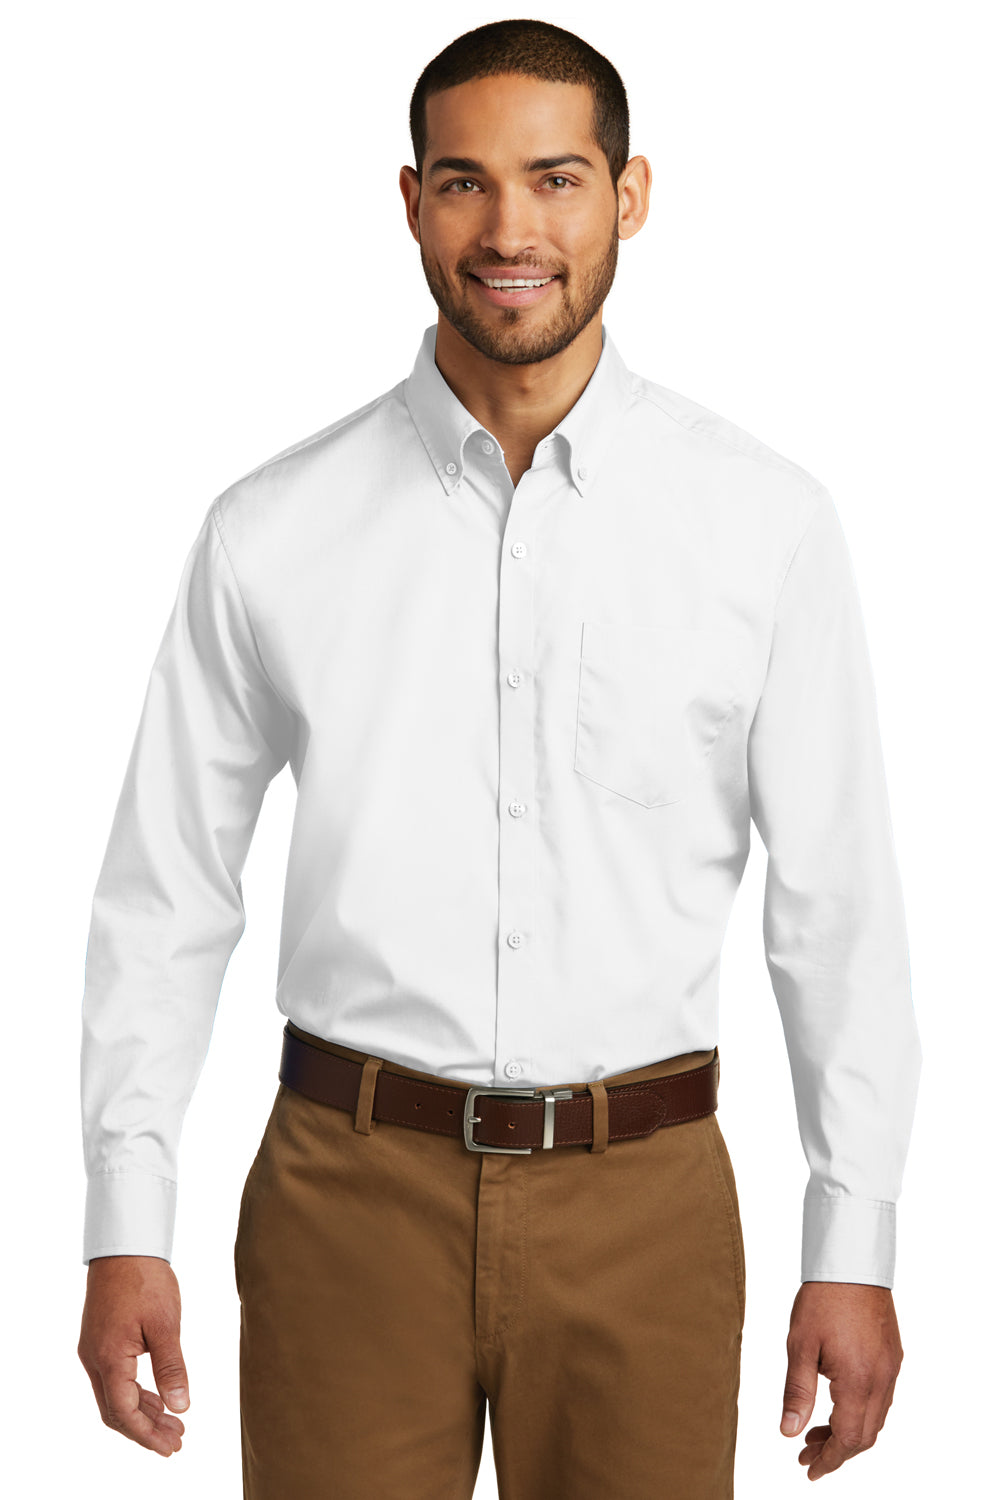 Port Authority W100 Mens Carefree Stain Resistant Long Sleeve Button Down Shirt w/ Pocket White Front